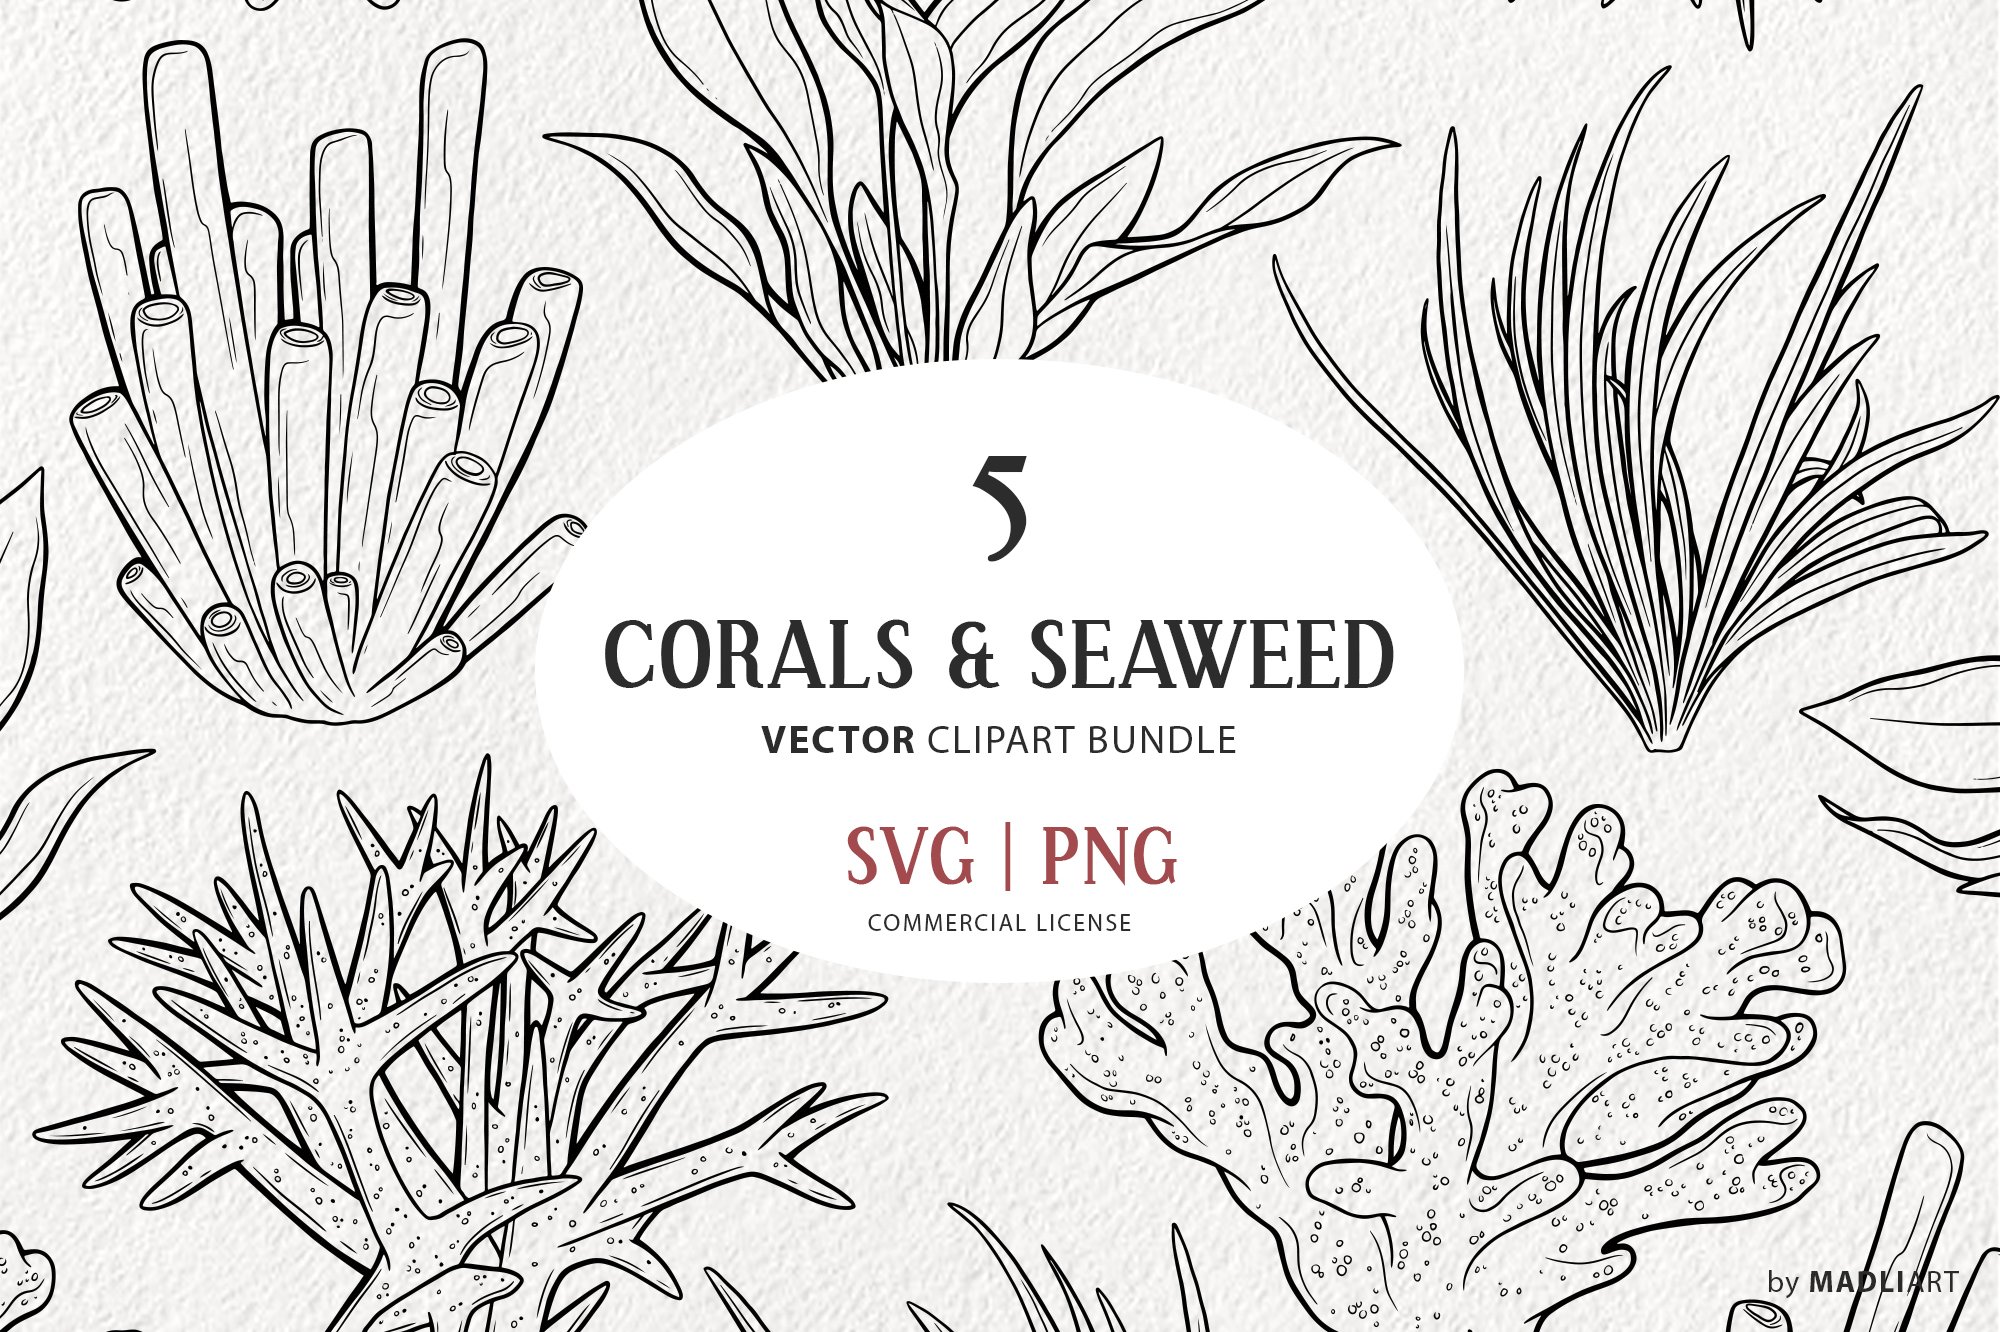 Corals & Seaweed Vector Line Art cover image.